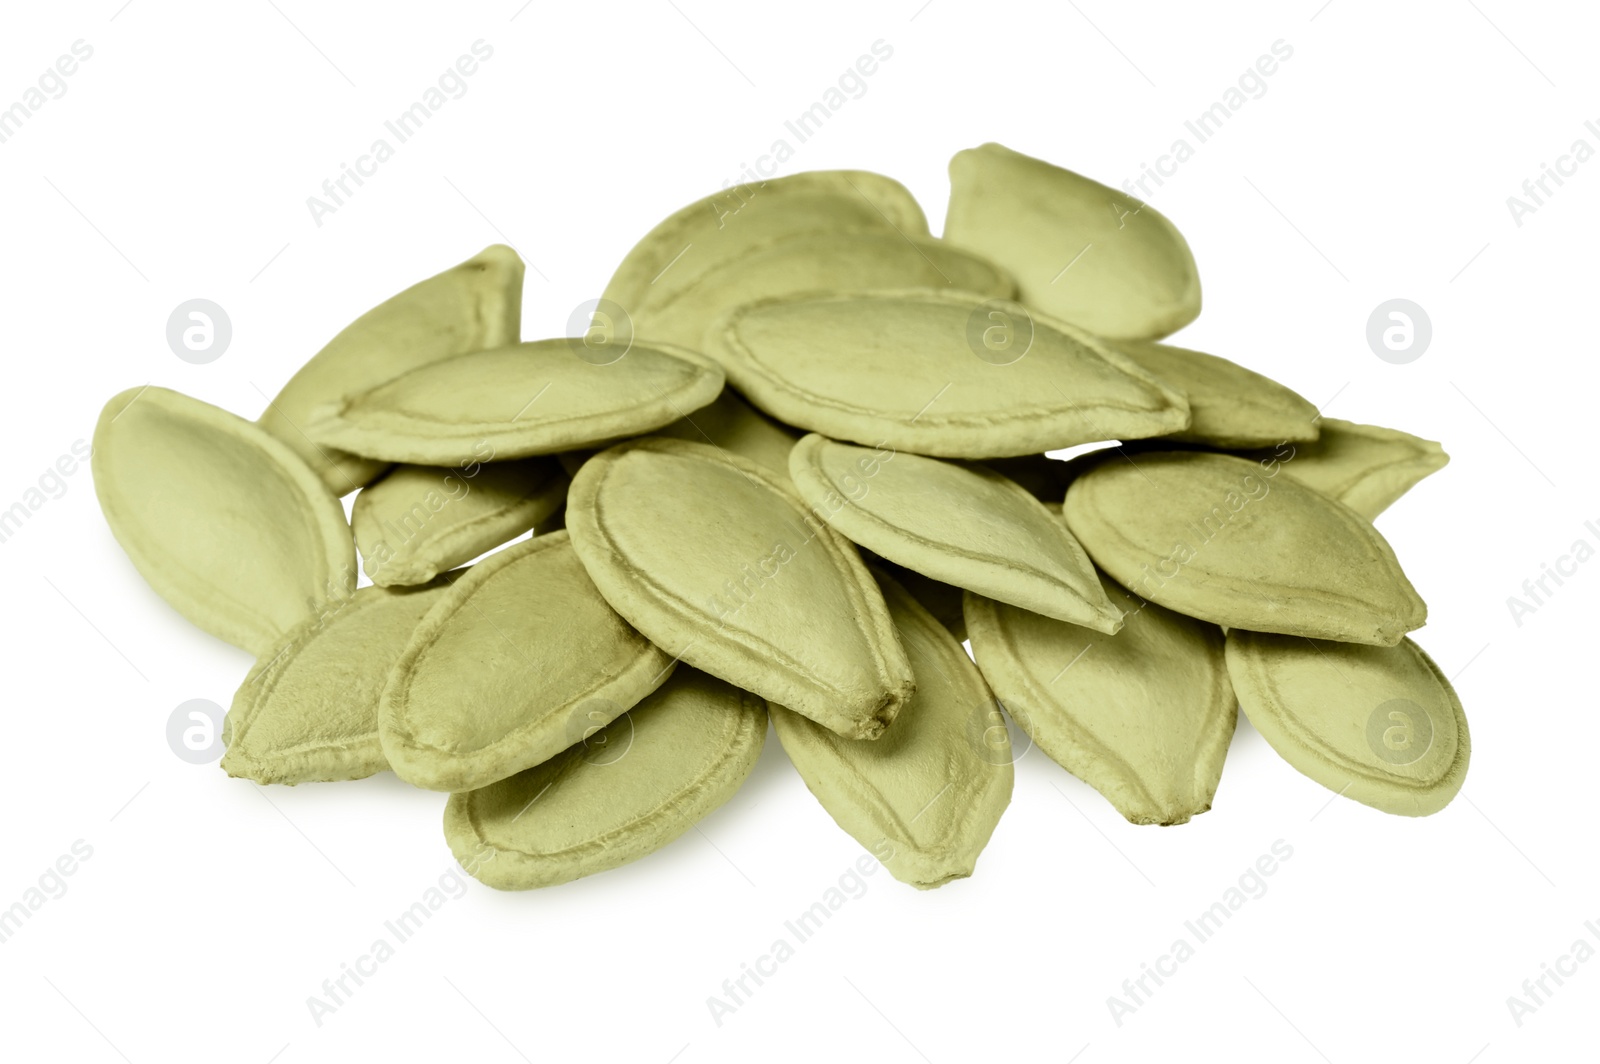 Photo of Heap of pumpkin seeds isolated on white